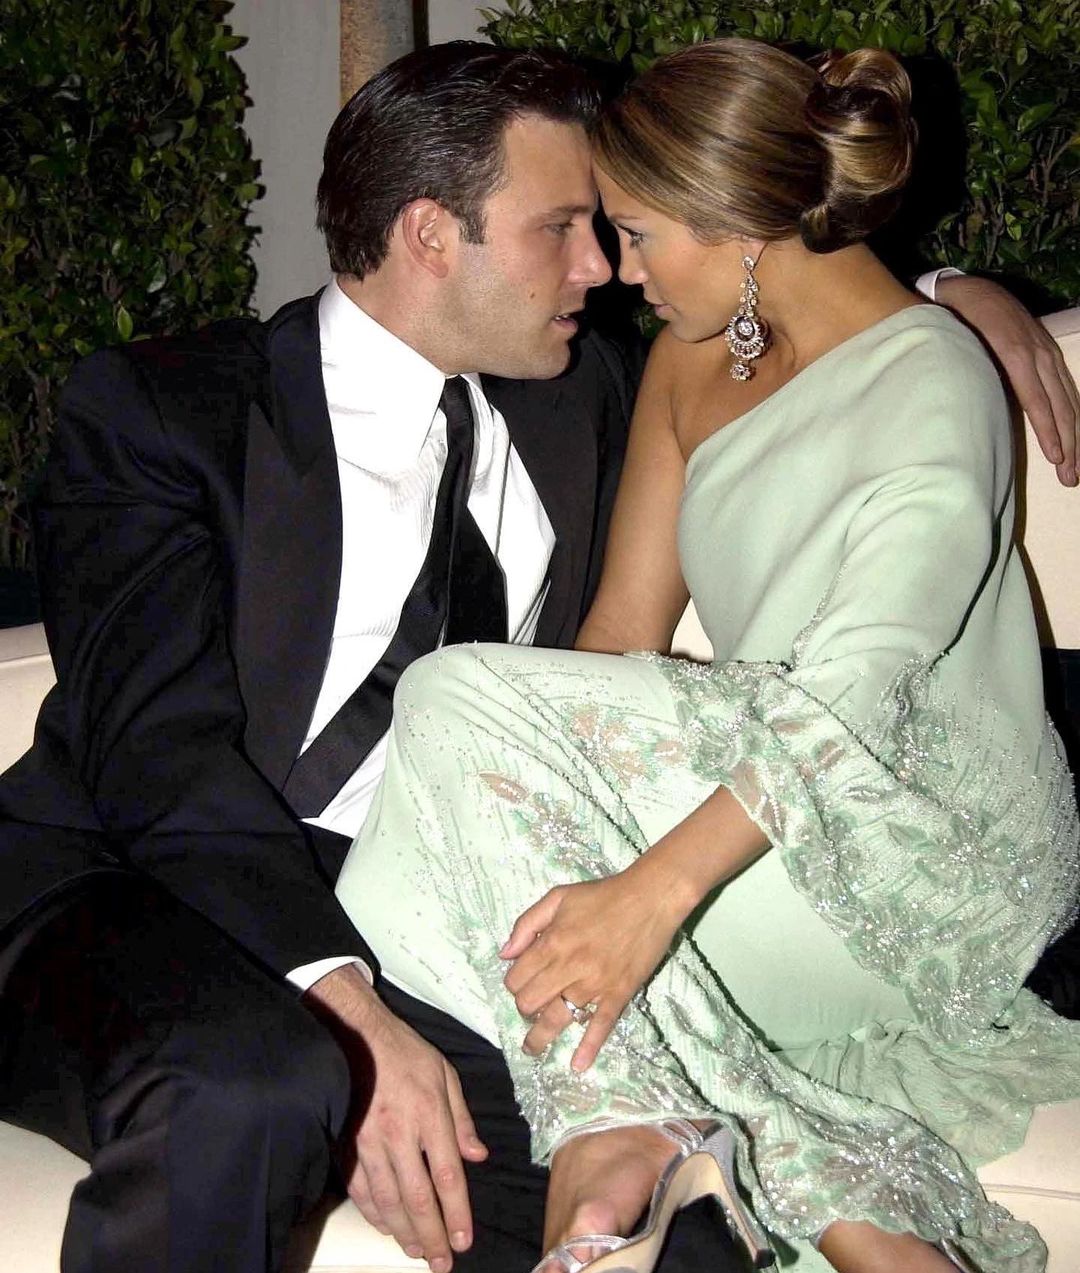 Jennifer Lopez and Ben Affleck back in the day, when they were engaged for the first time